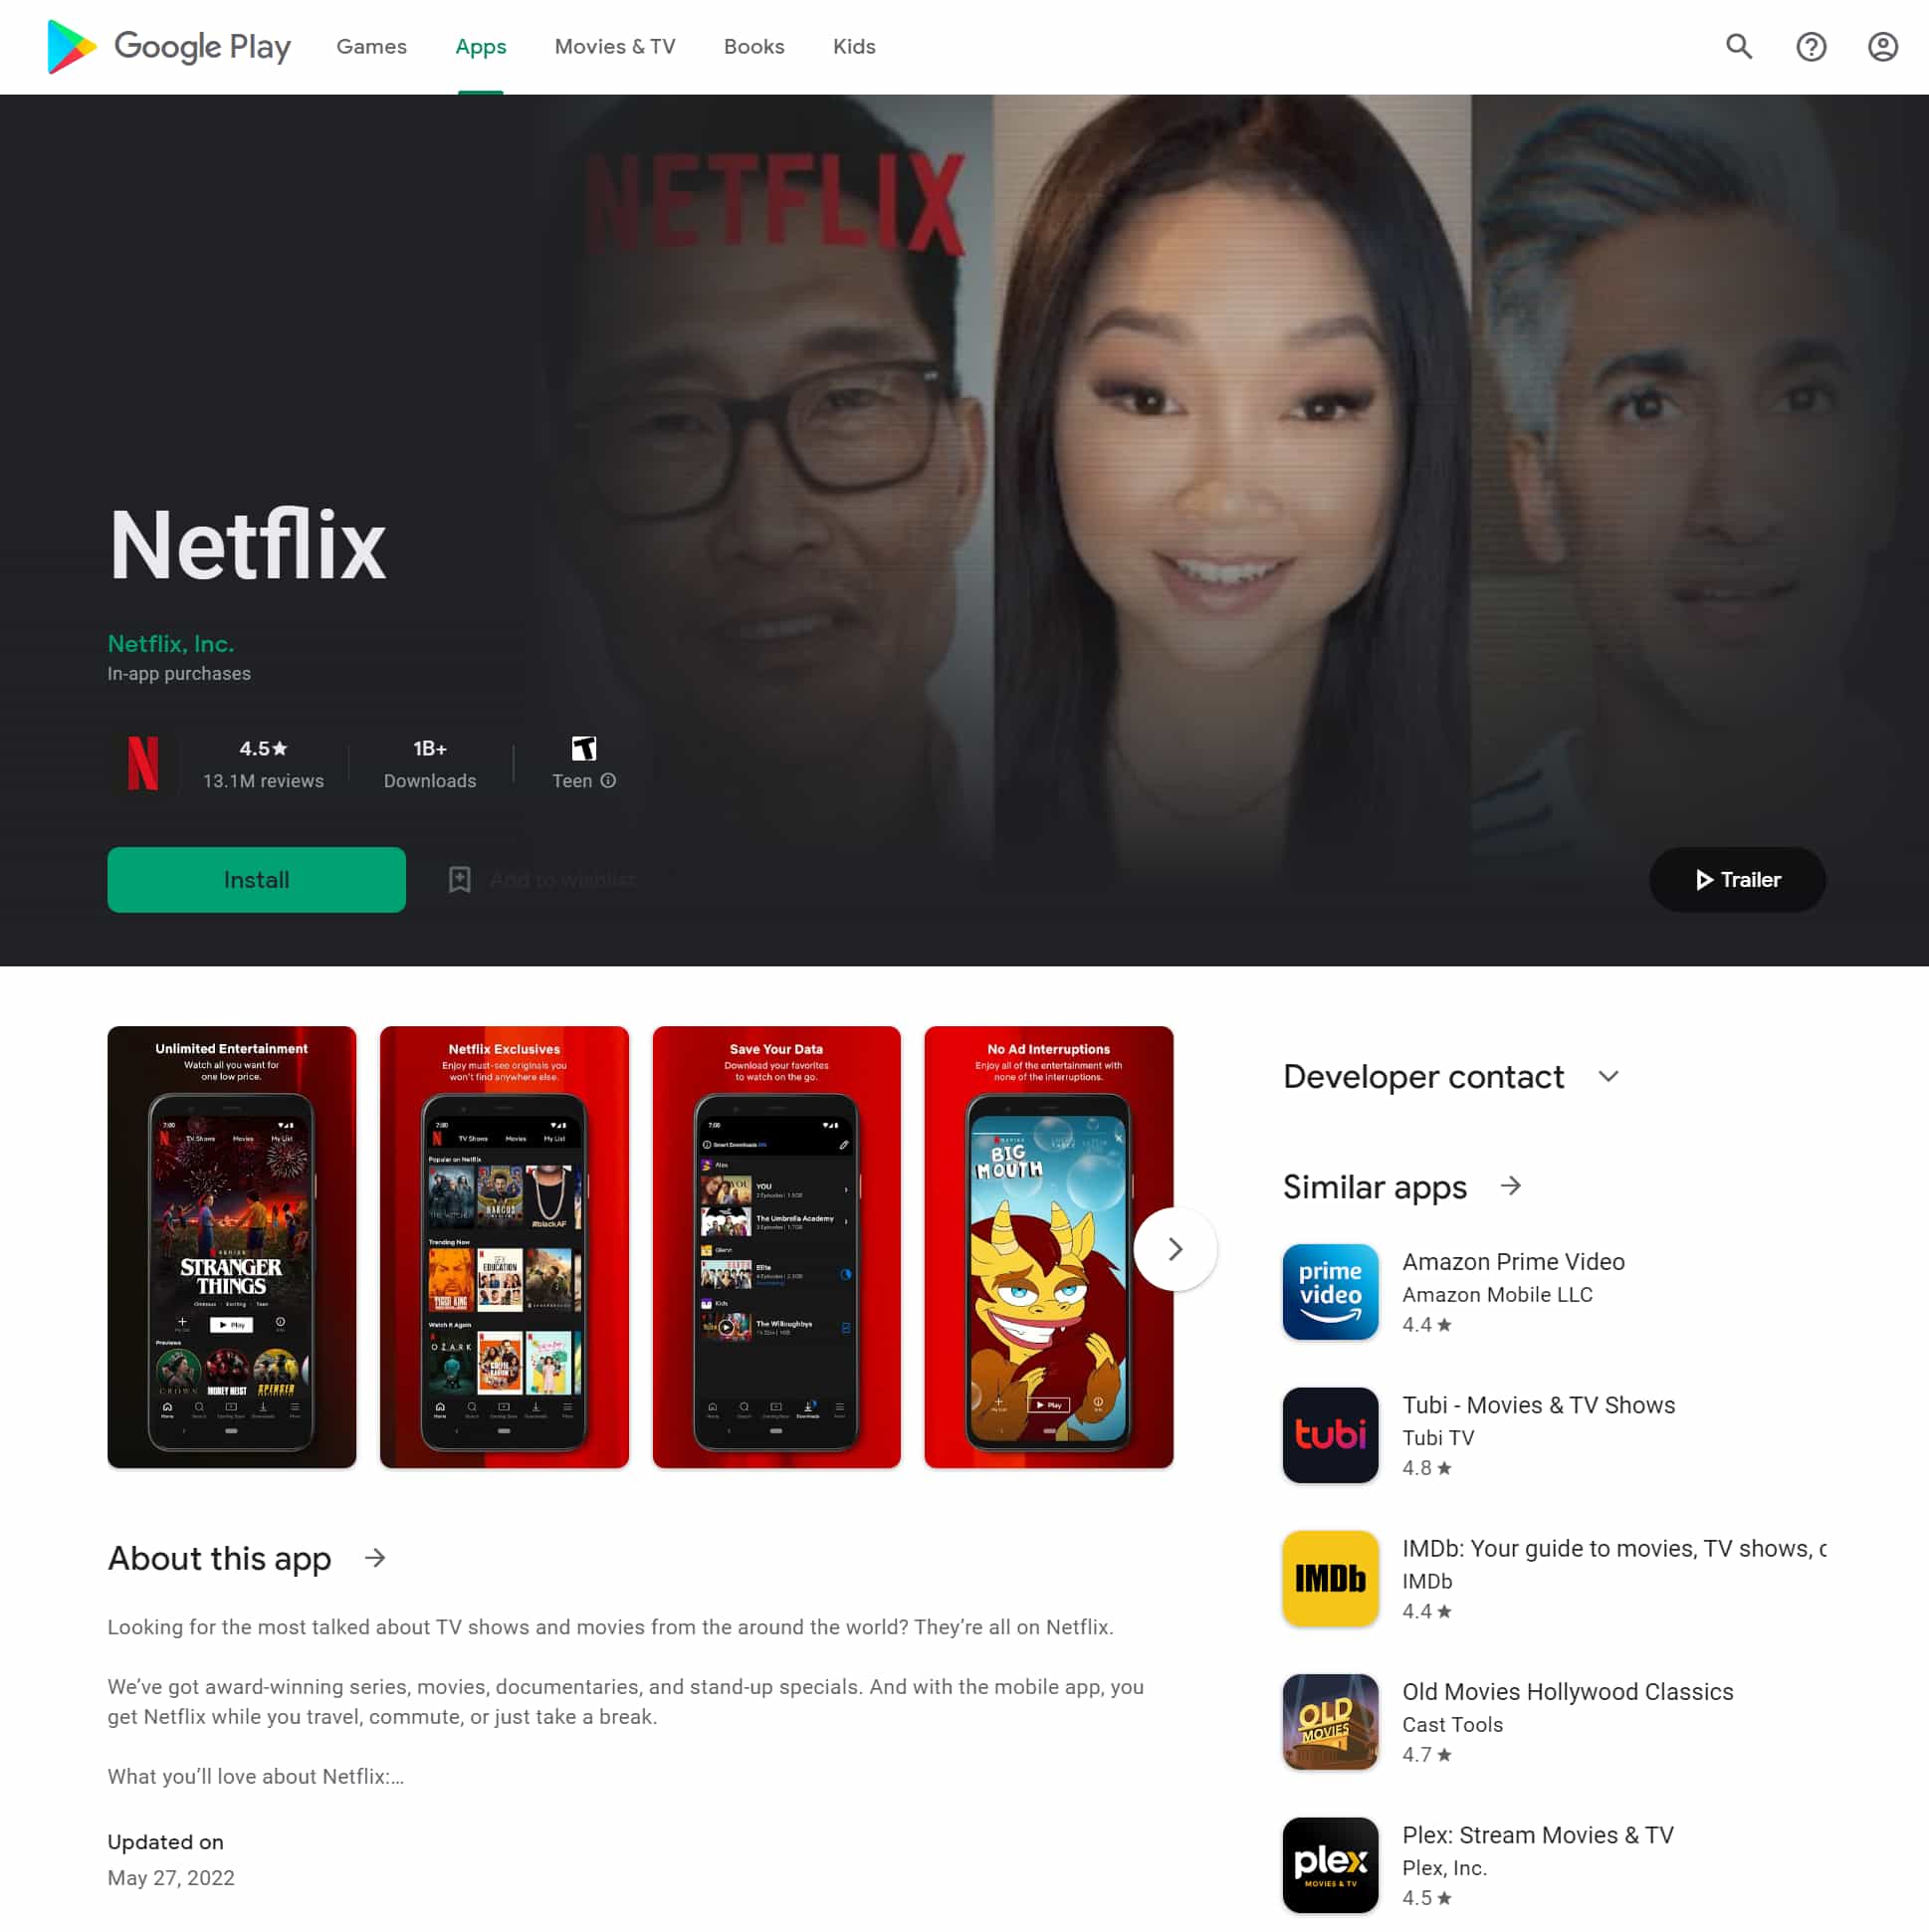 Example with product_id: com.netflix.mediaclient